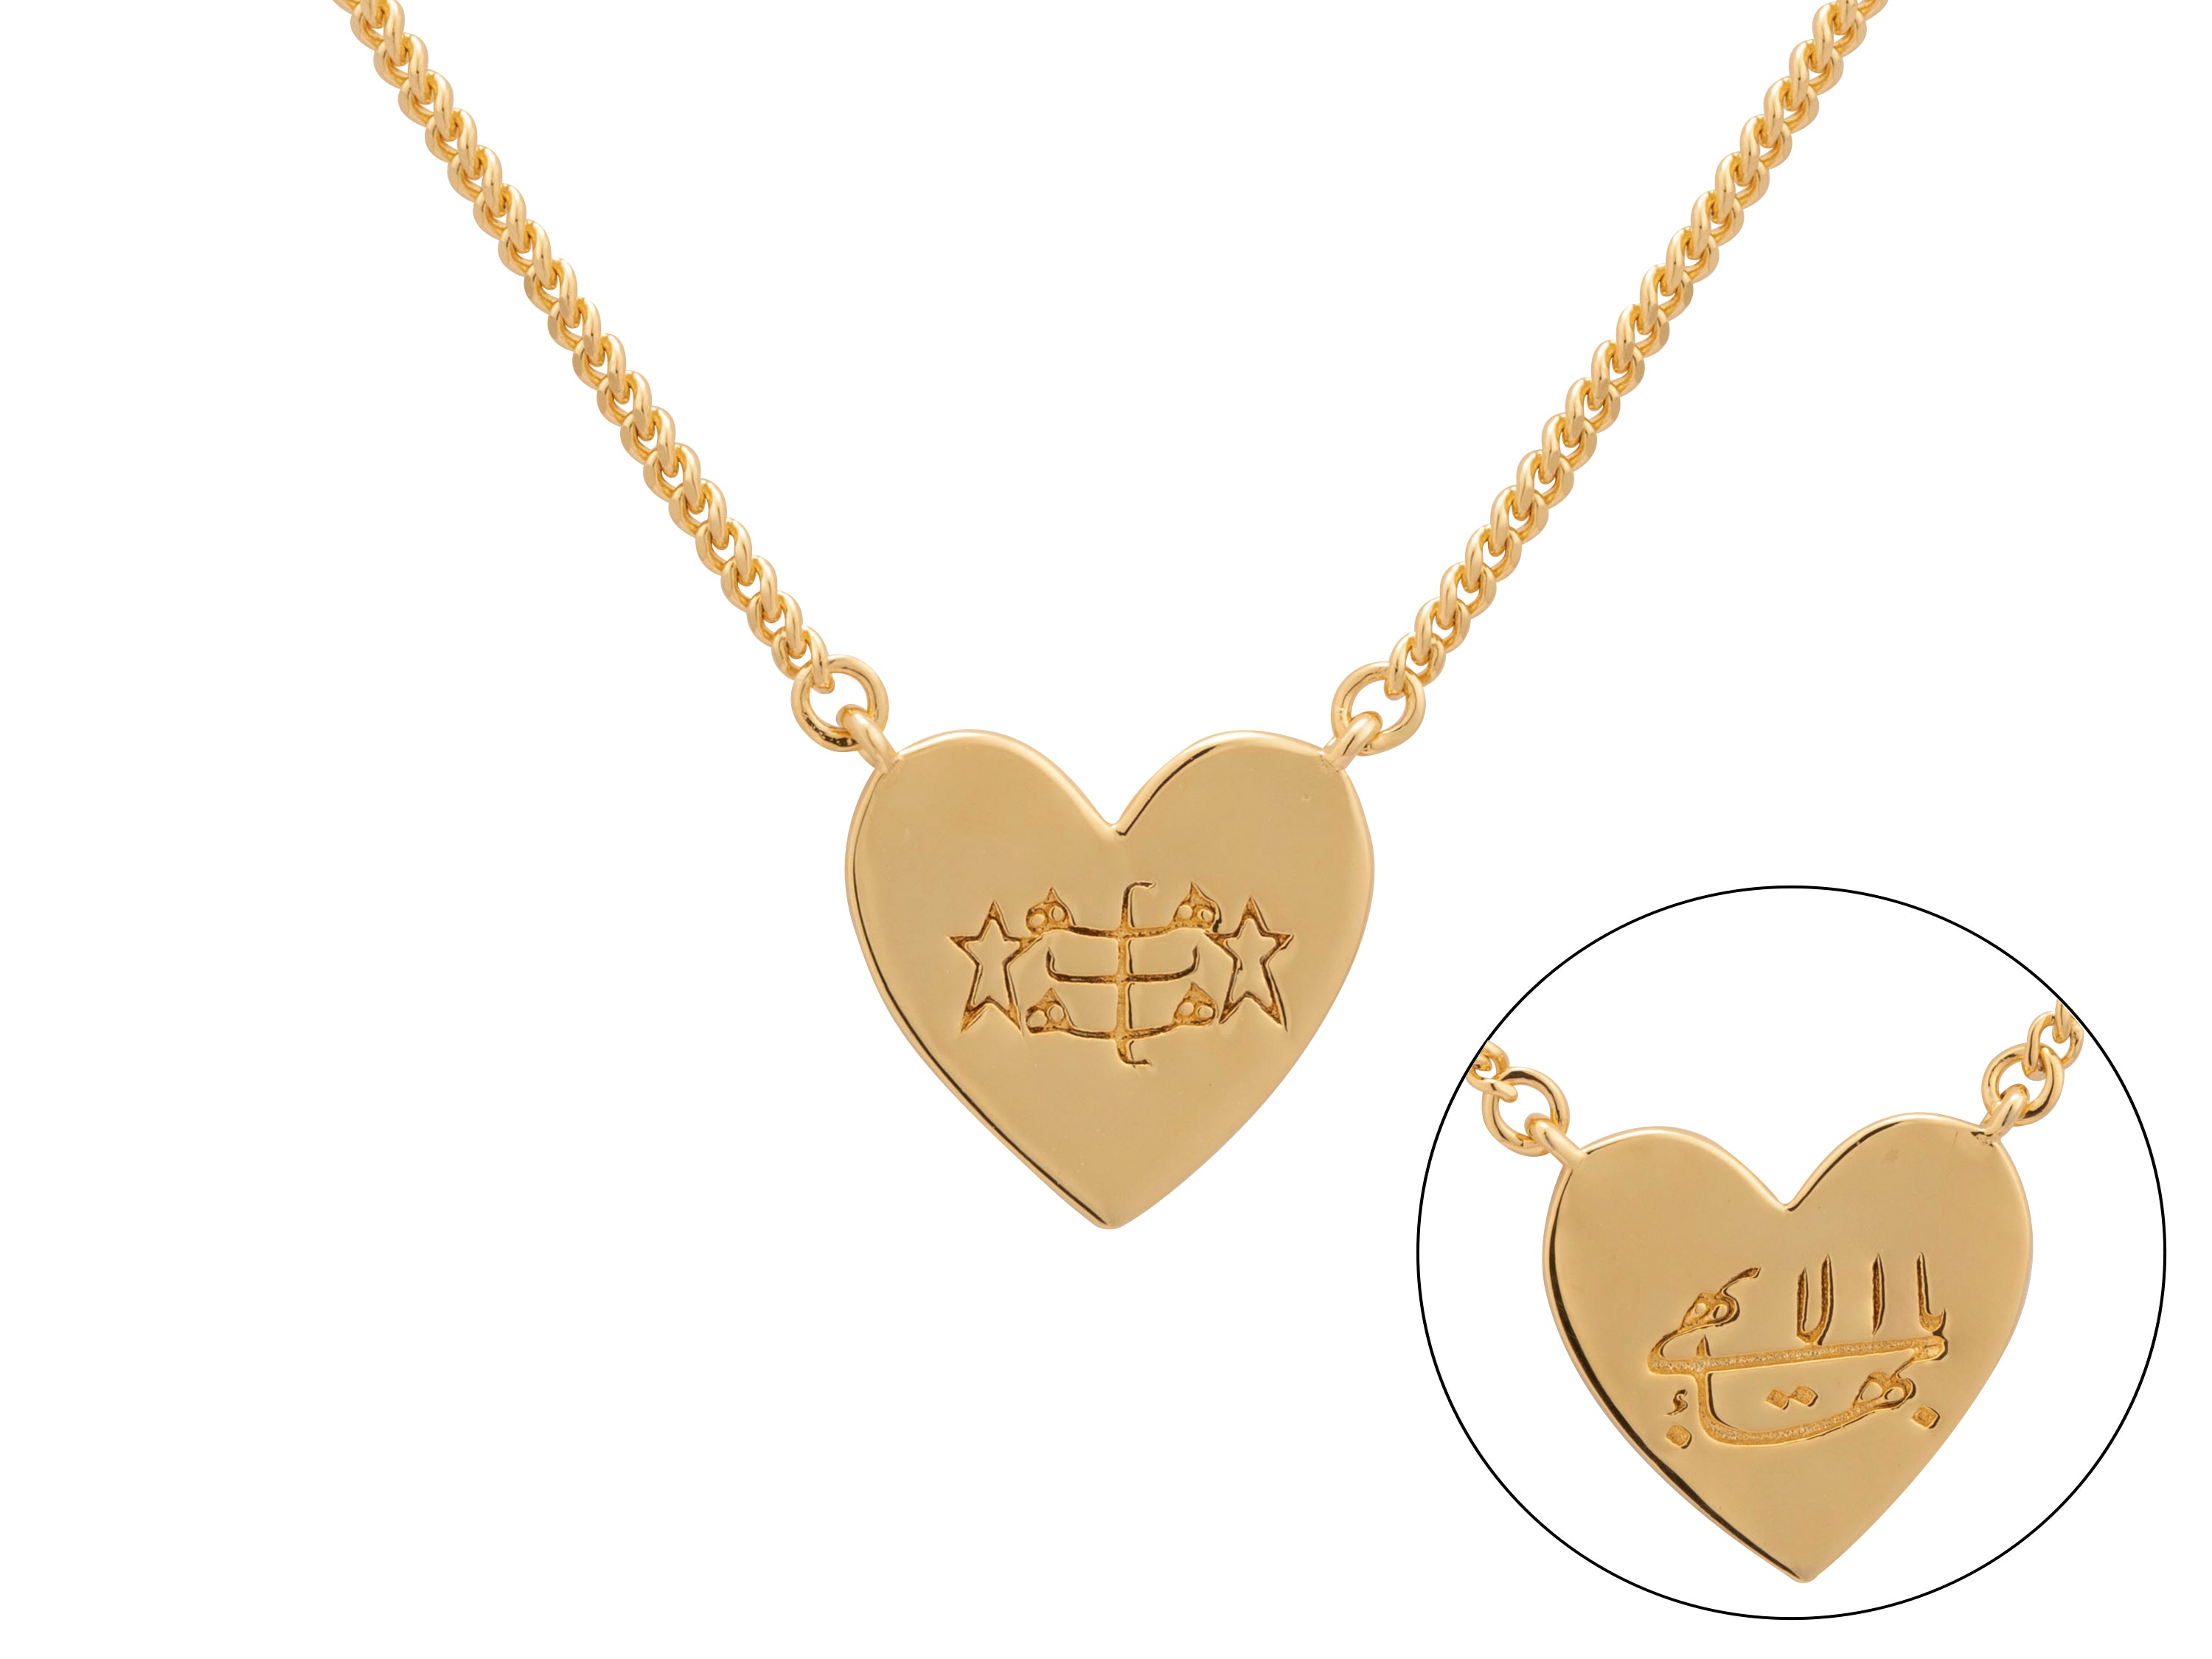 simple gold heart Bahai necklace with greatest name in arabic and ringstone symbol